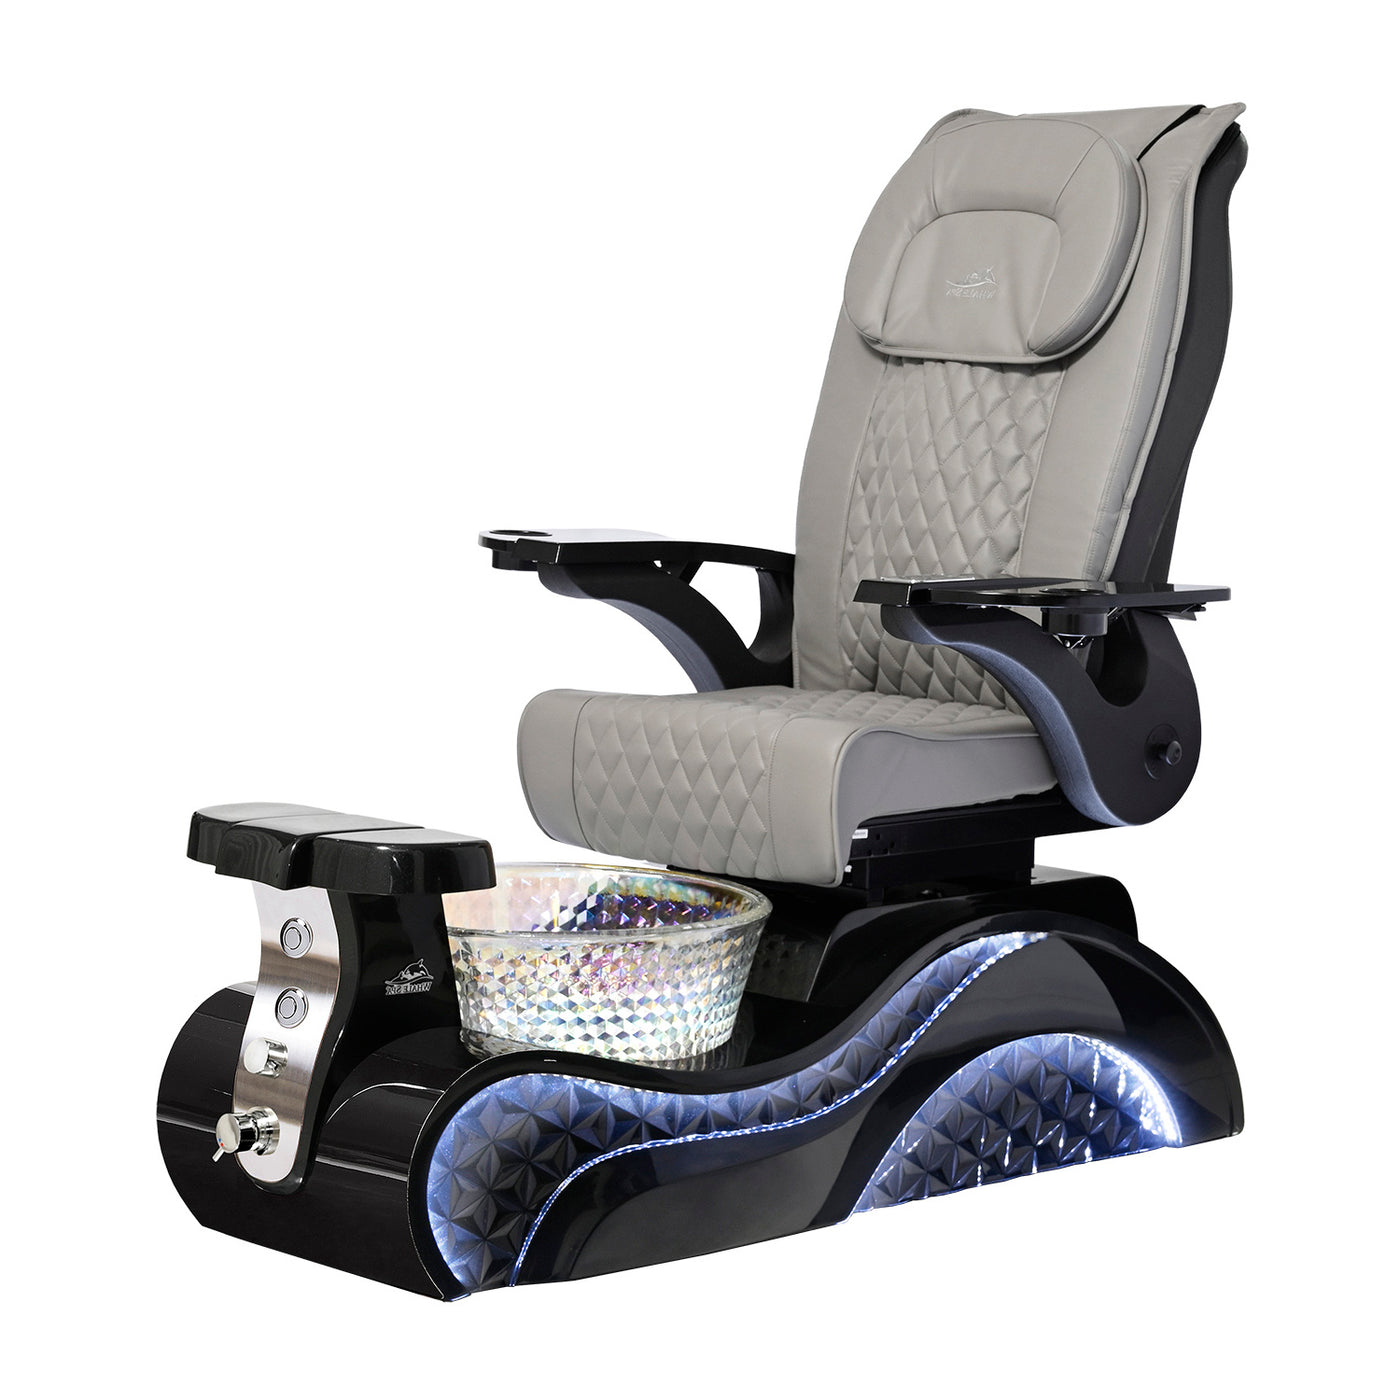 Lucent II Pedicure Chair. Gray Seat, Black Armrest, Black Base & Crystal Glass Bowl  